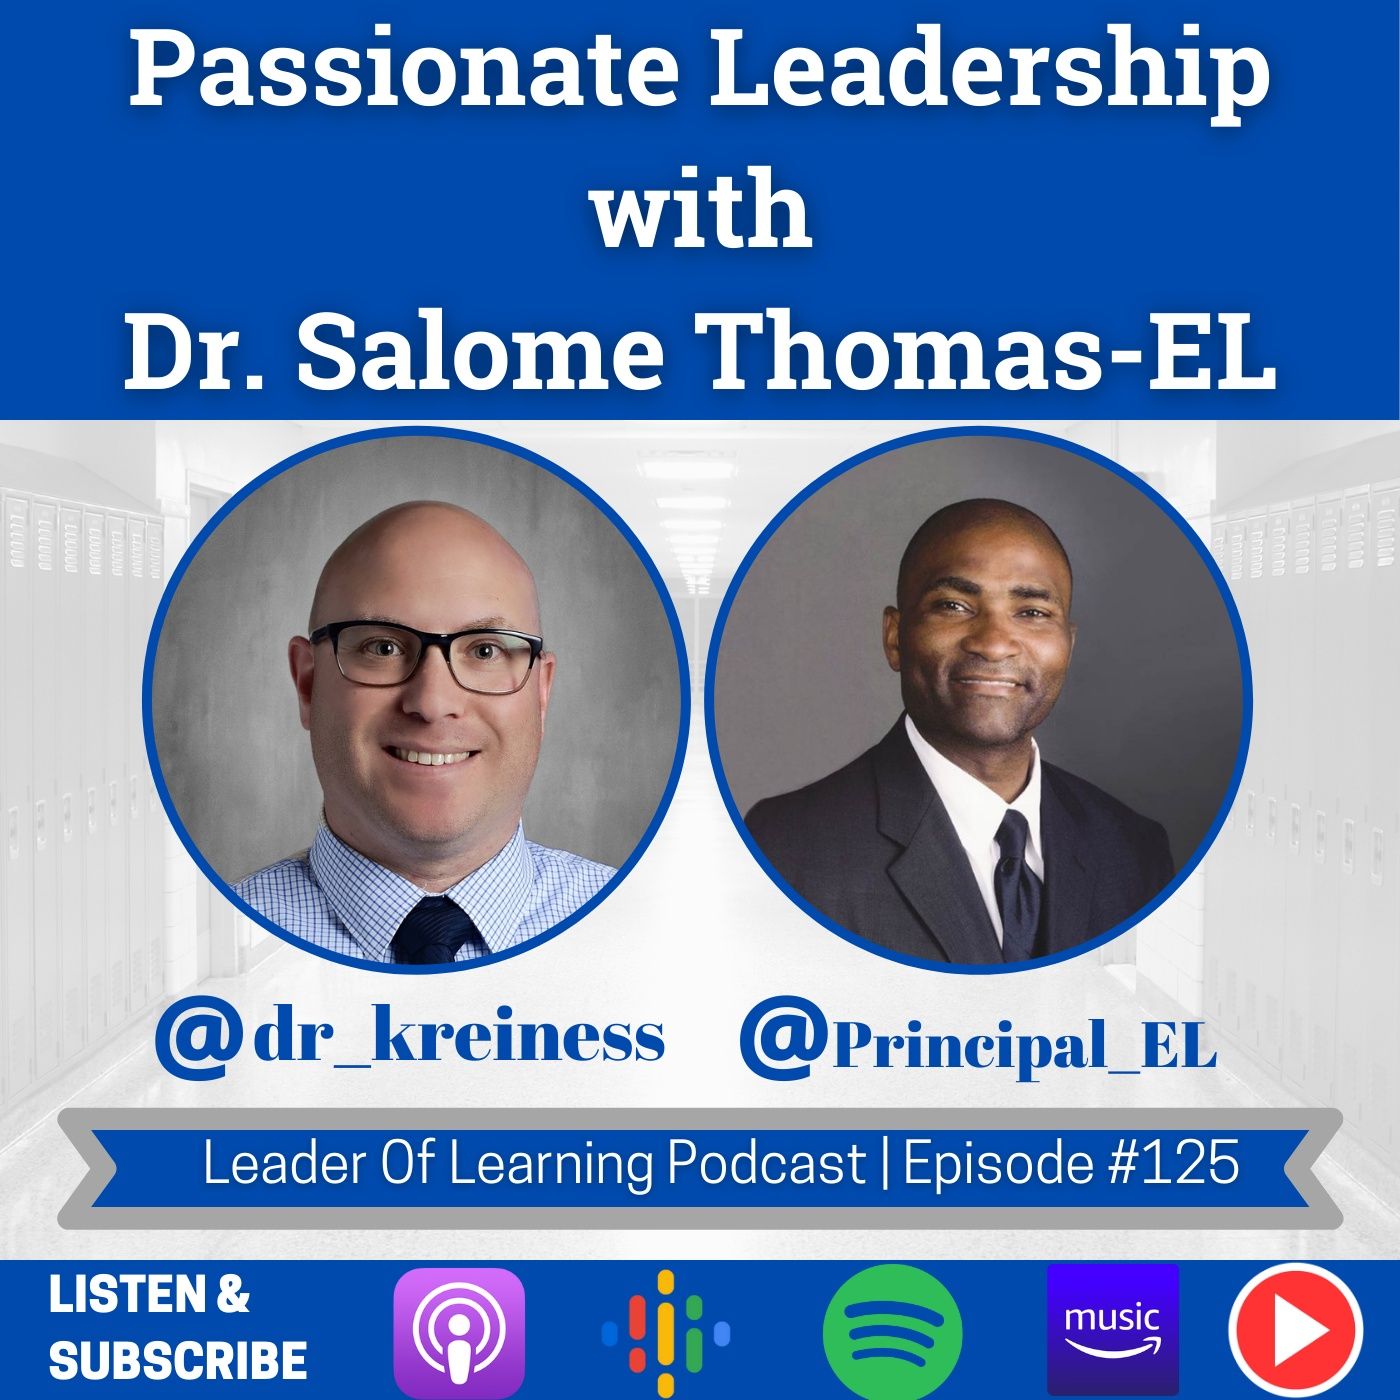 Passionate Leadership with Dr. Salome Thomas-EL Image